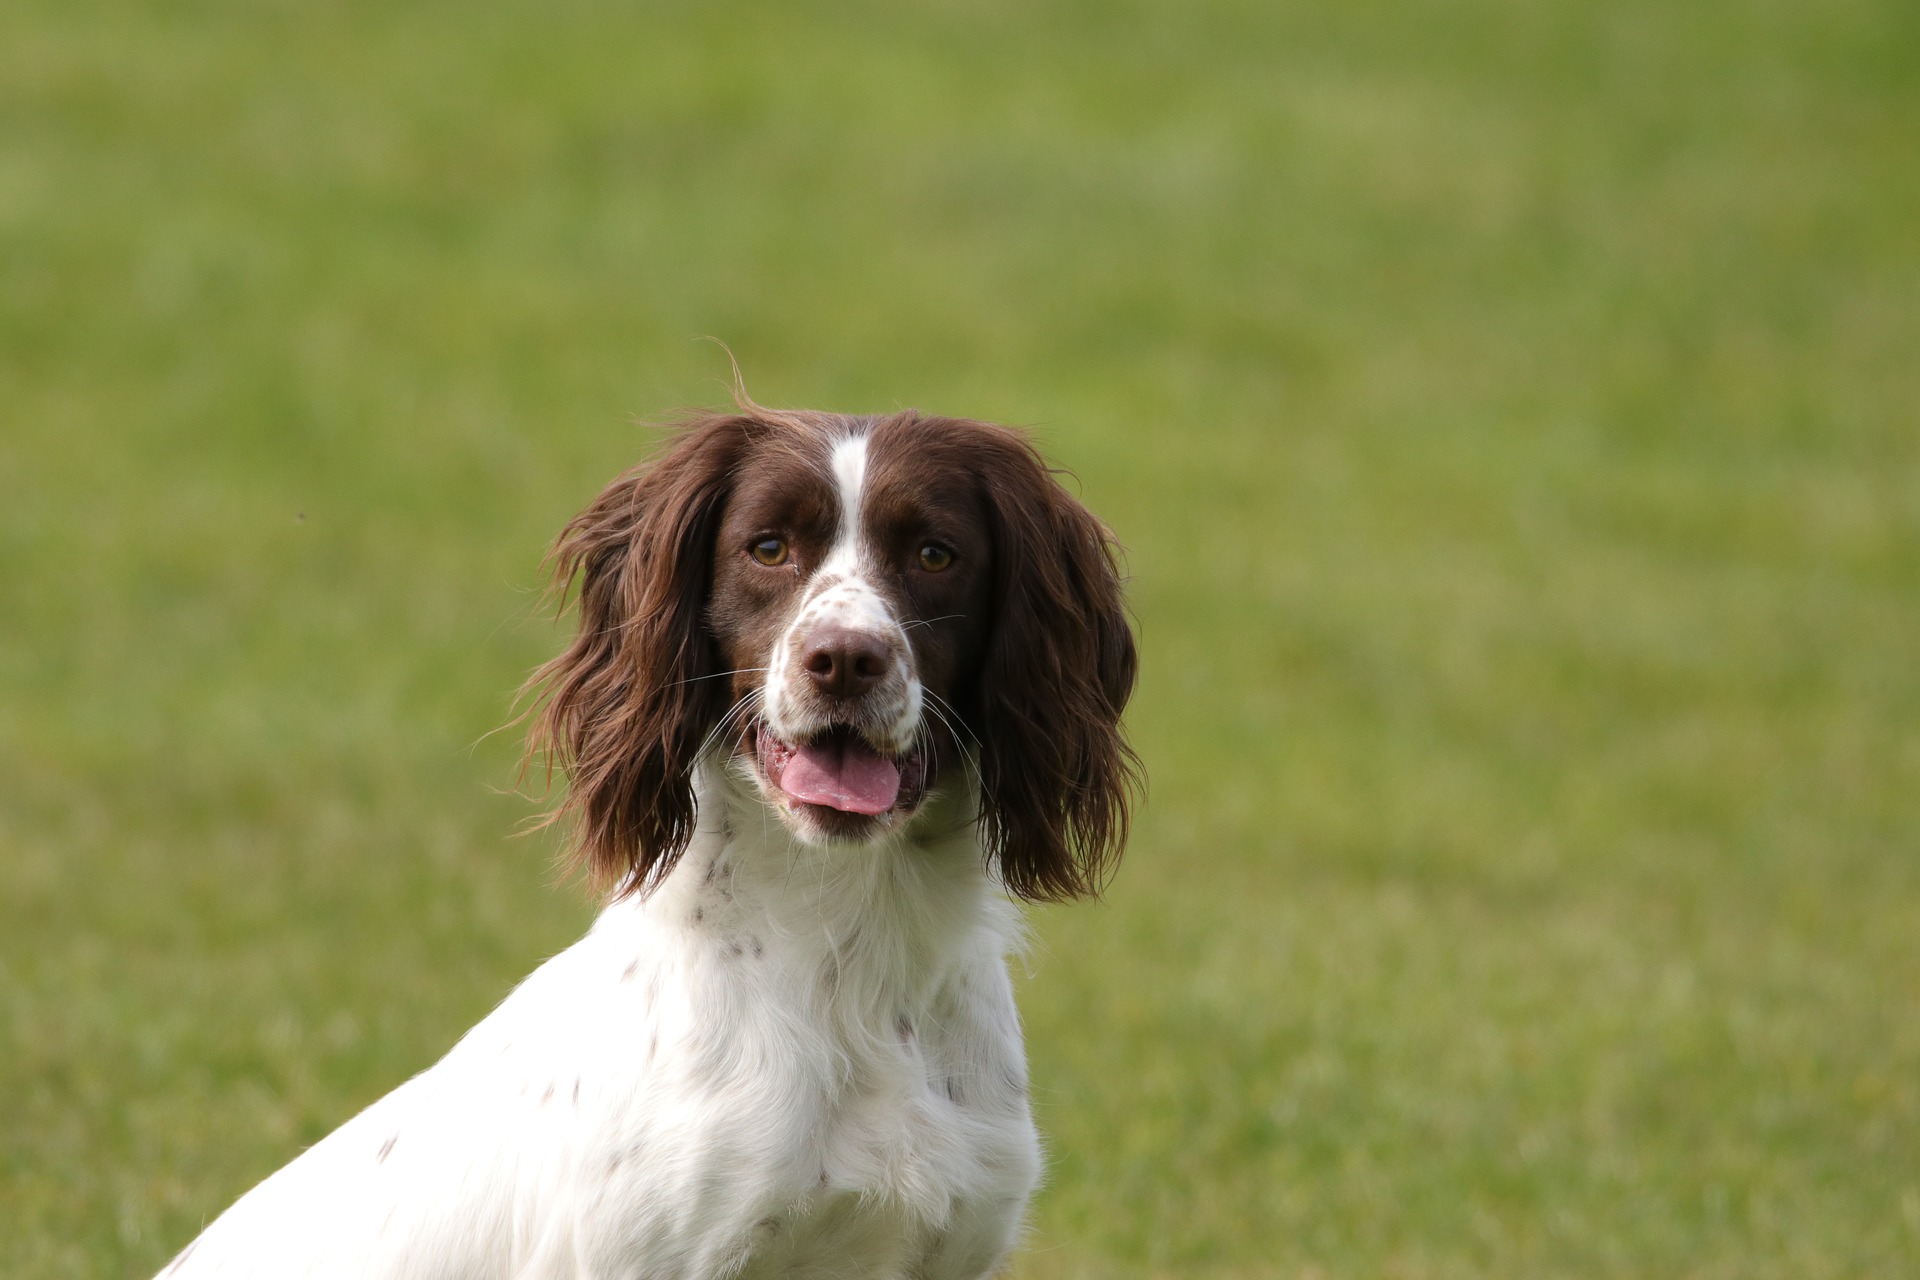 Can rescue dogs be good gundogs?